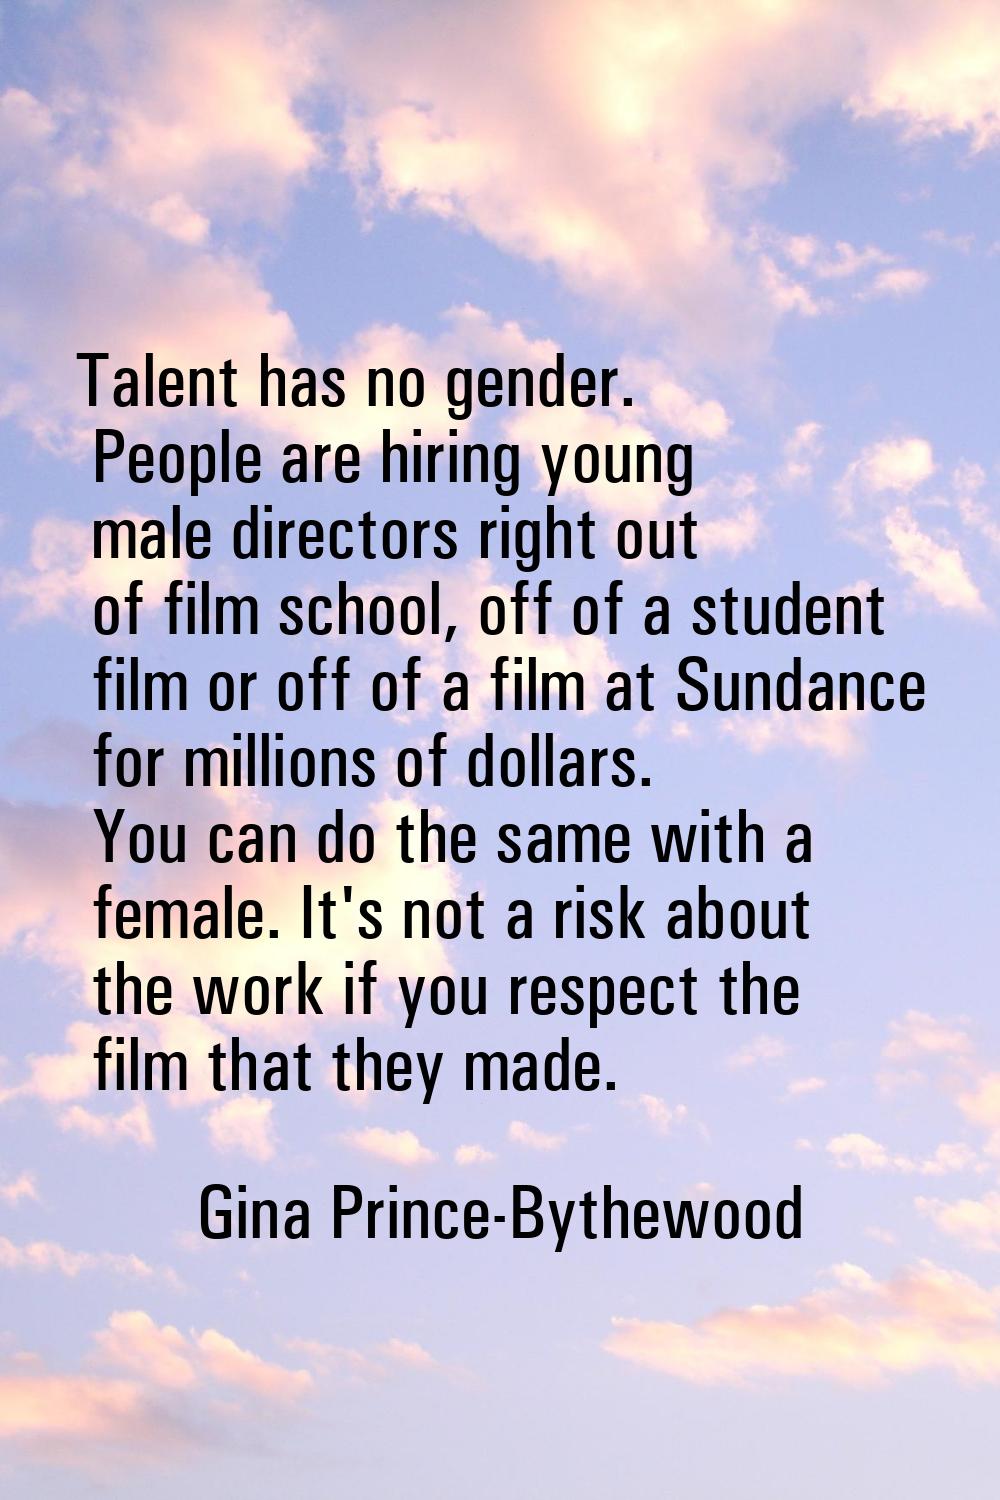 Talent has no gender. People are hiring young male directors right out of film school, off of a stu